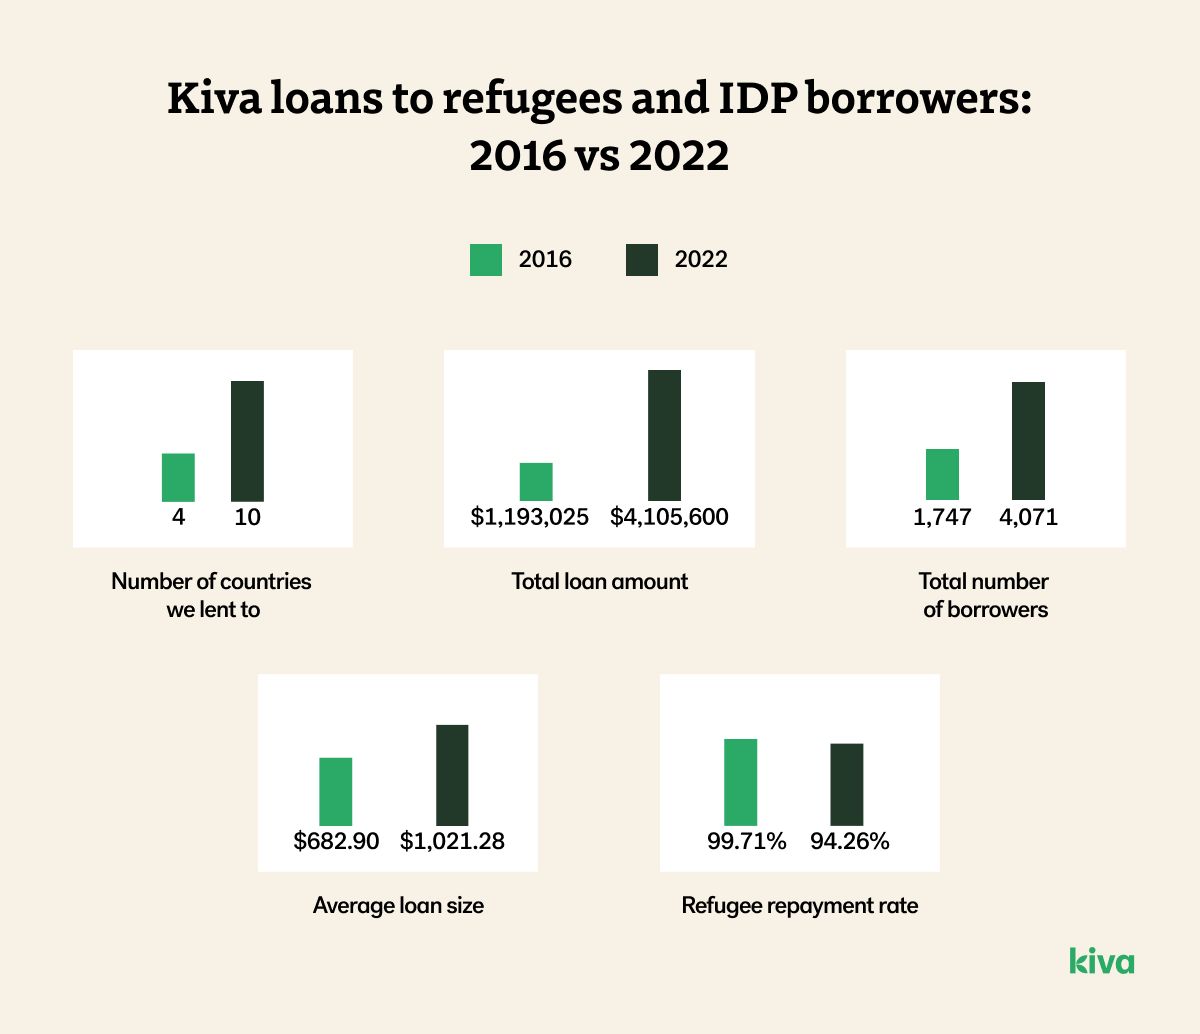 Kiva loans to refugees and IDPs in 2016 vs 2022